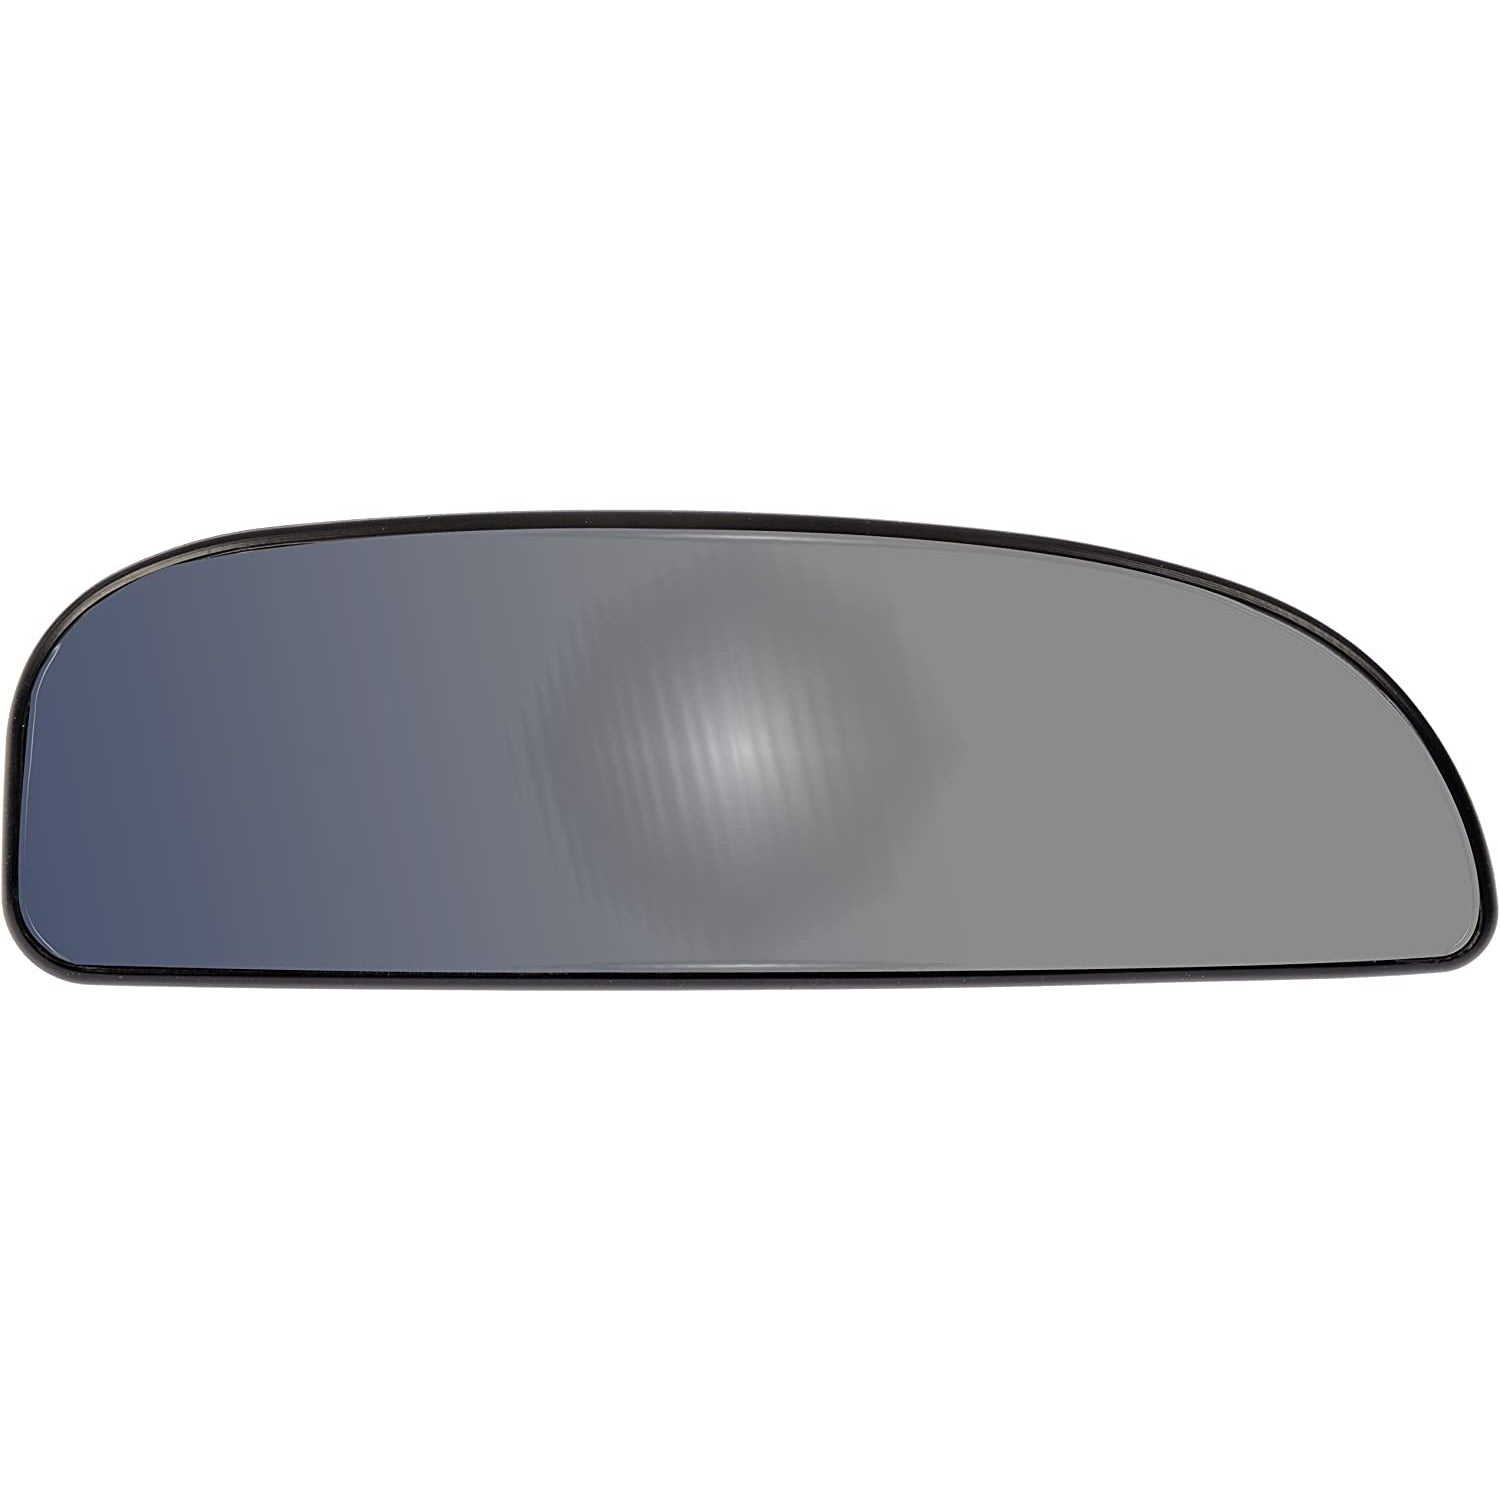 MTM 56320 Dorman Replacement Plastic-Backed Mirror Glass (Left Lower, 99-04 Ford Trucks)